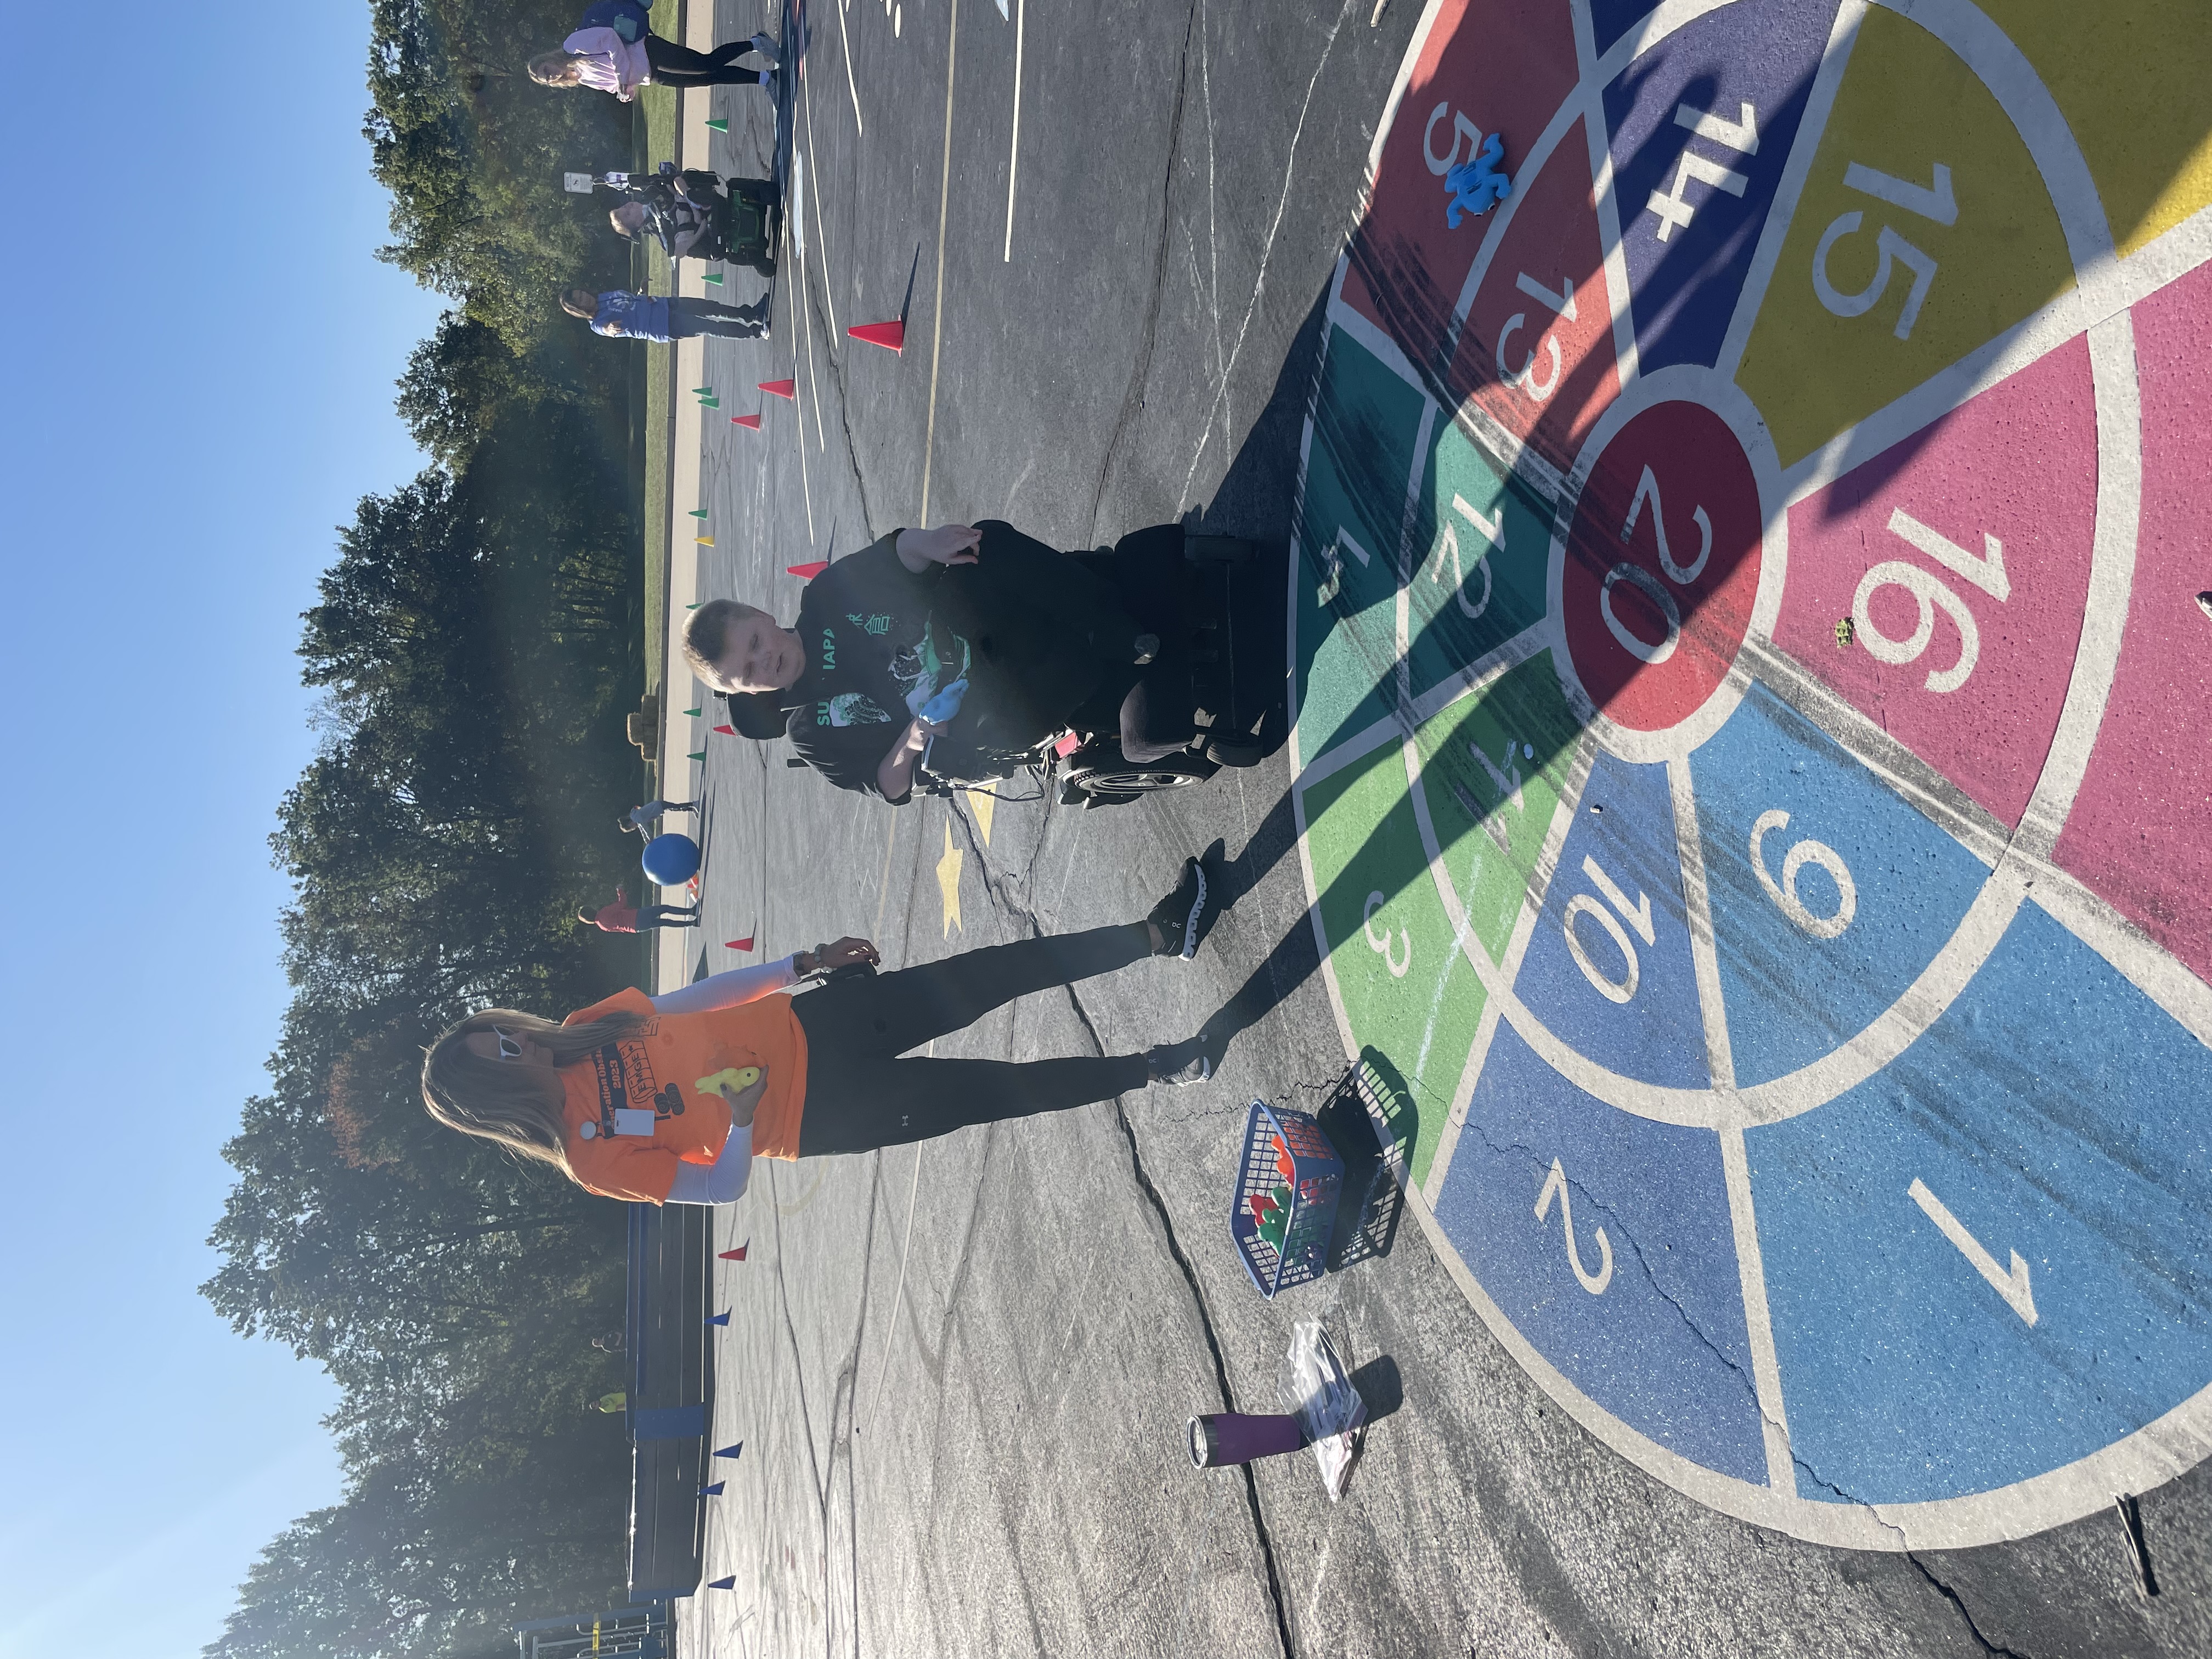 Emge Obstacle Course Blacktop